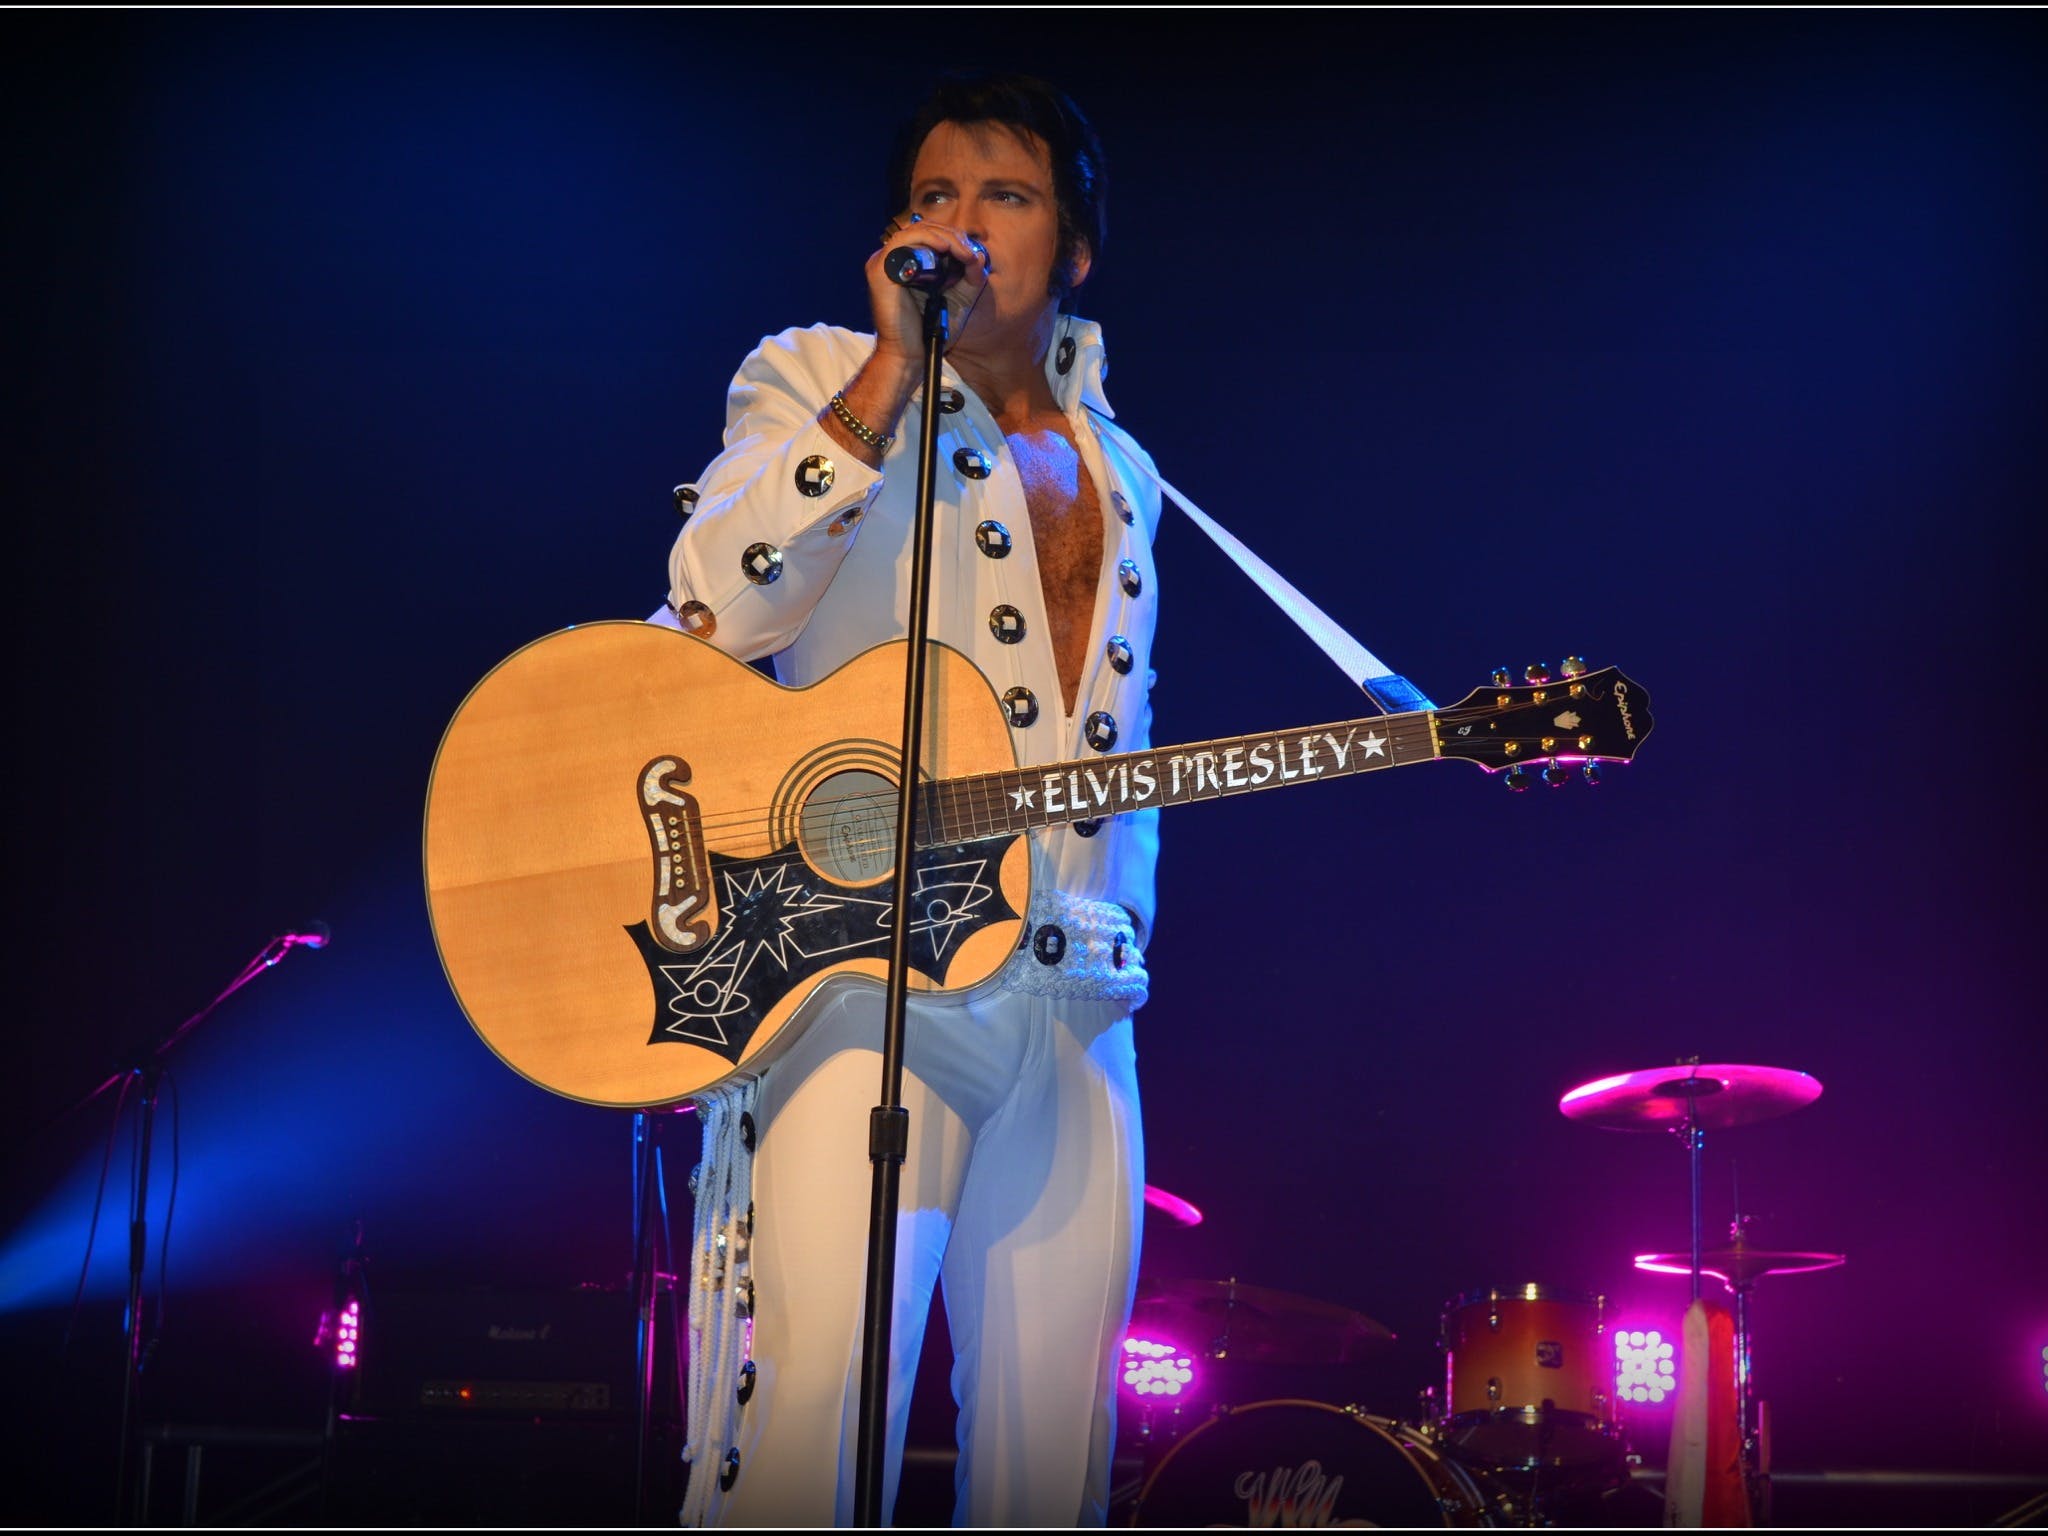 Elvis Forever - Damian Mullin 'Up Close and Personal' - Accommodation Bookings